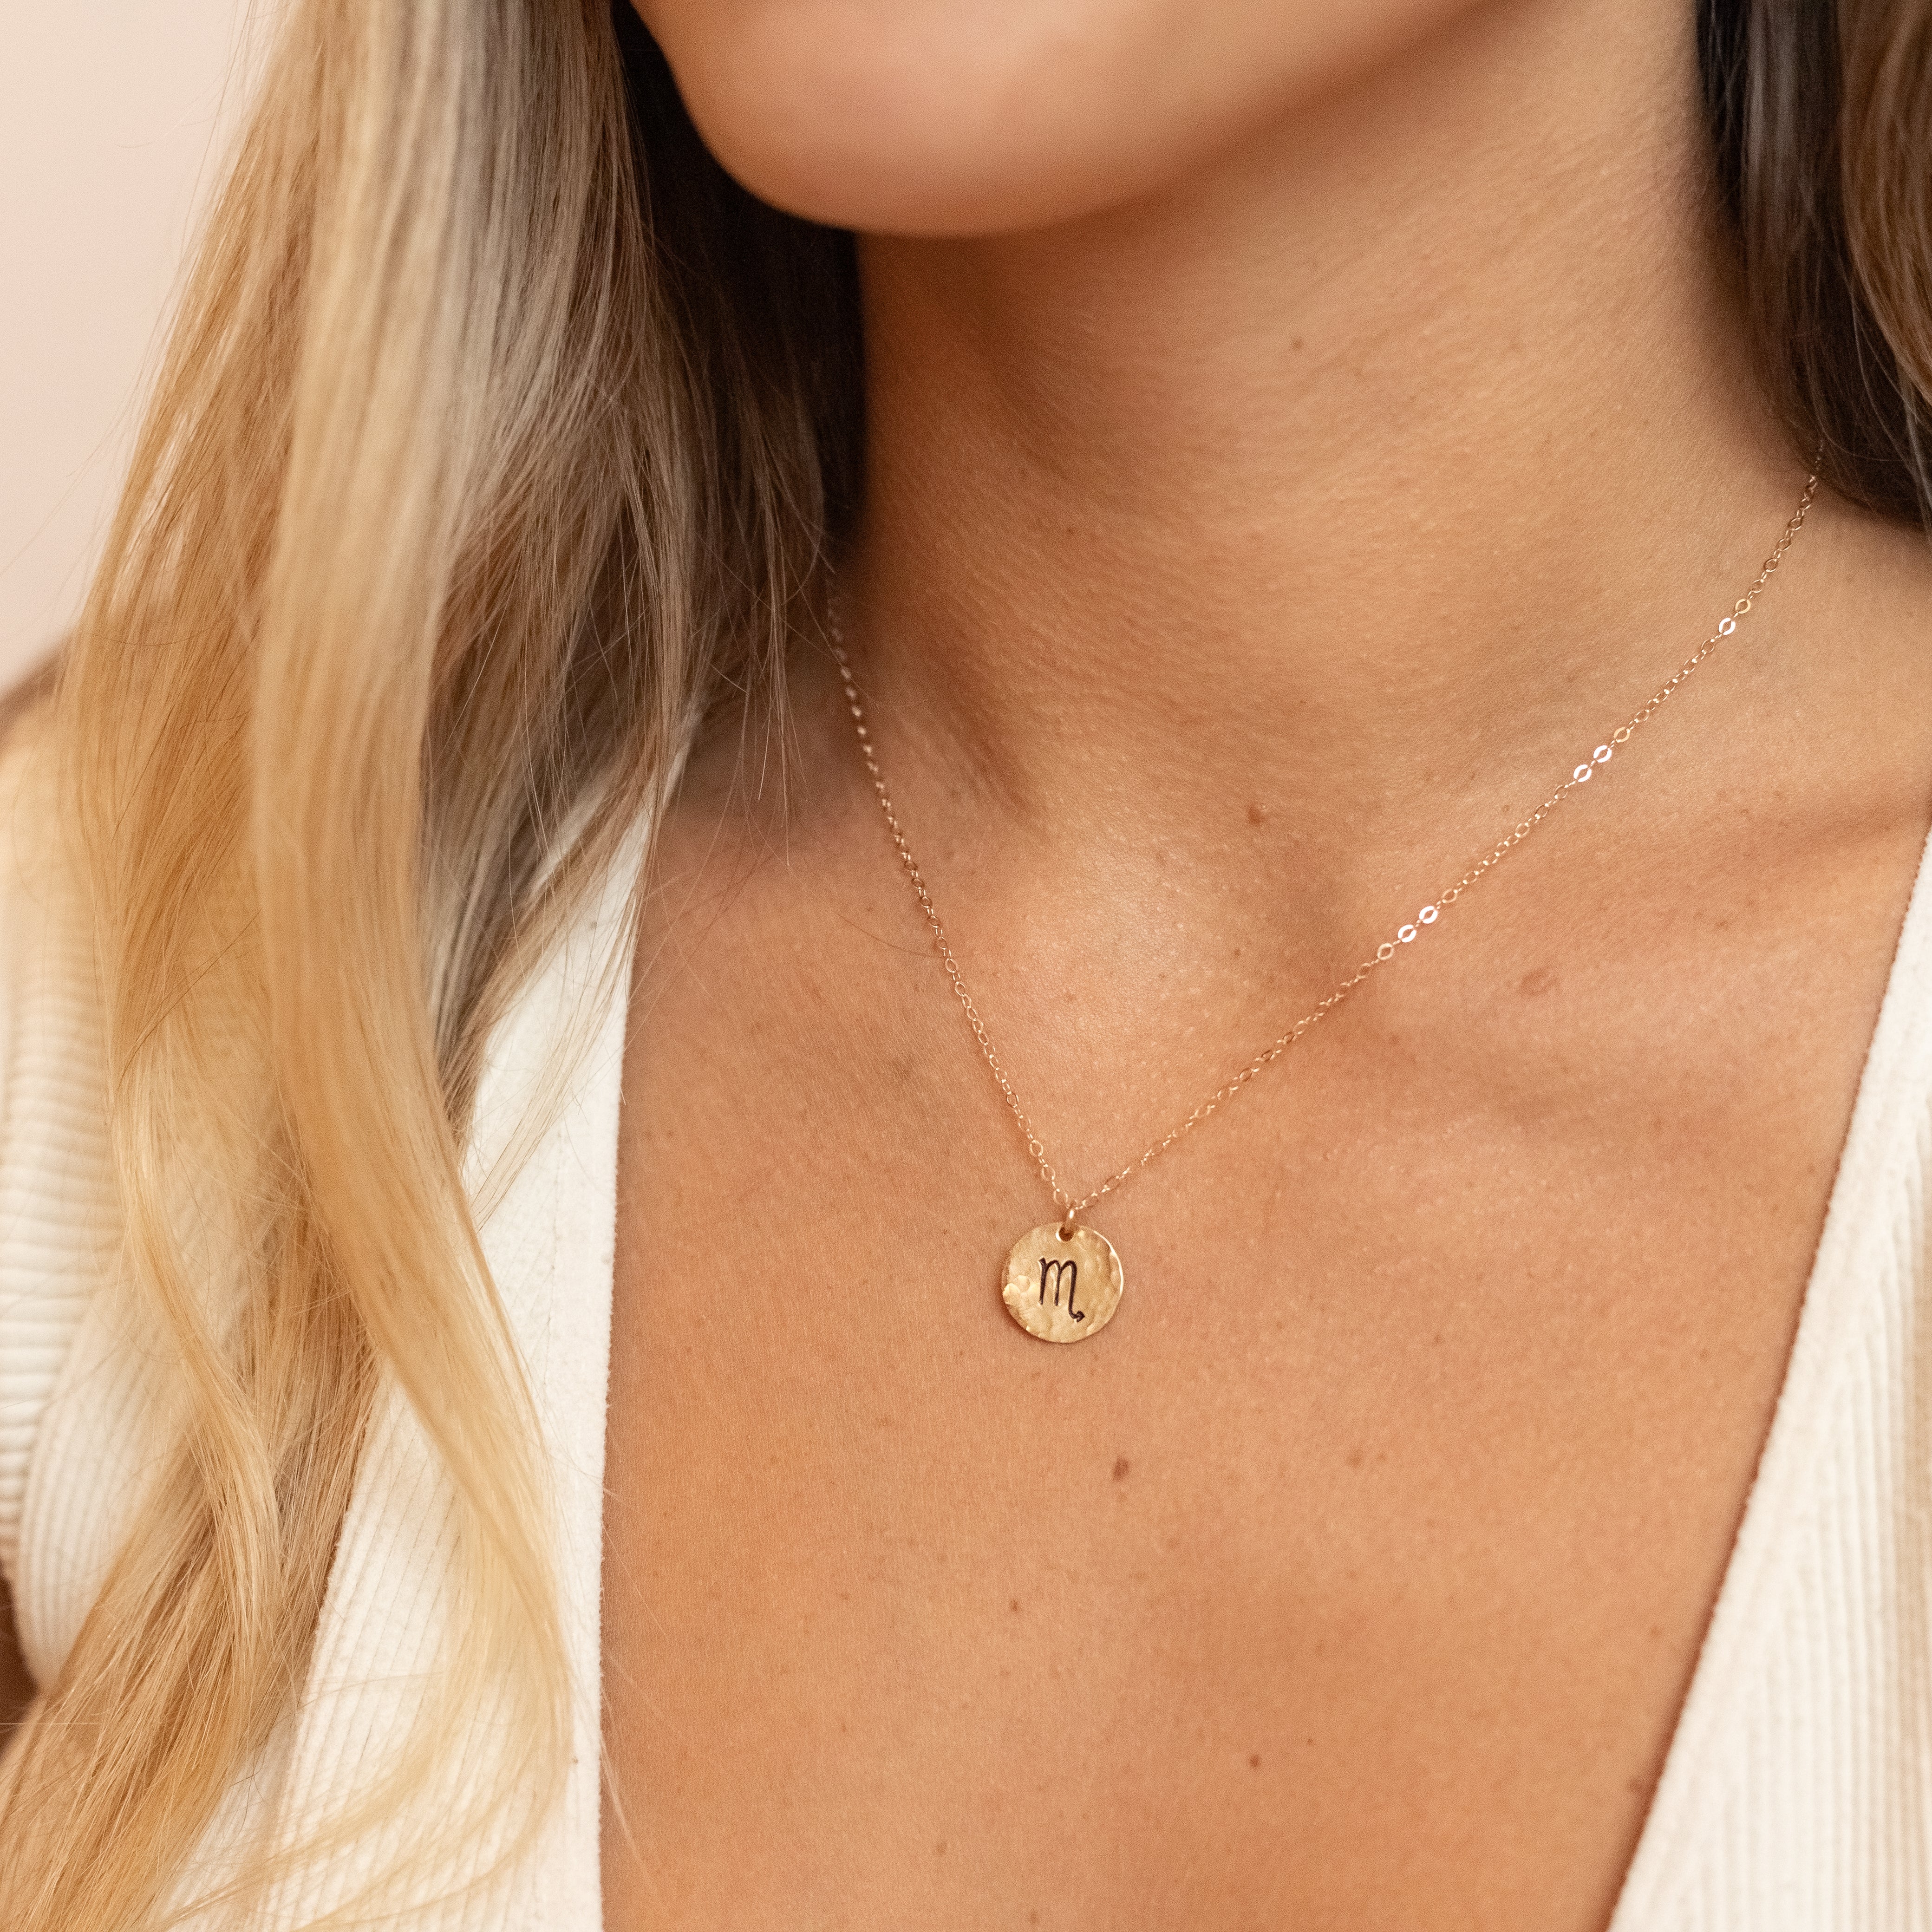 gold filled zodiac charm necklaces. Shown on a woman's neck. 